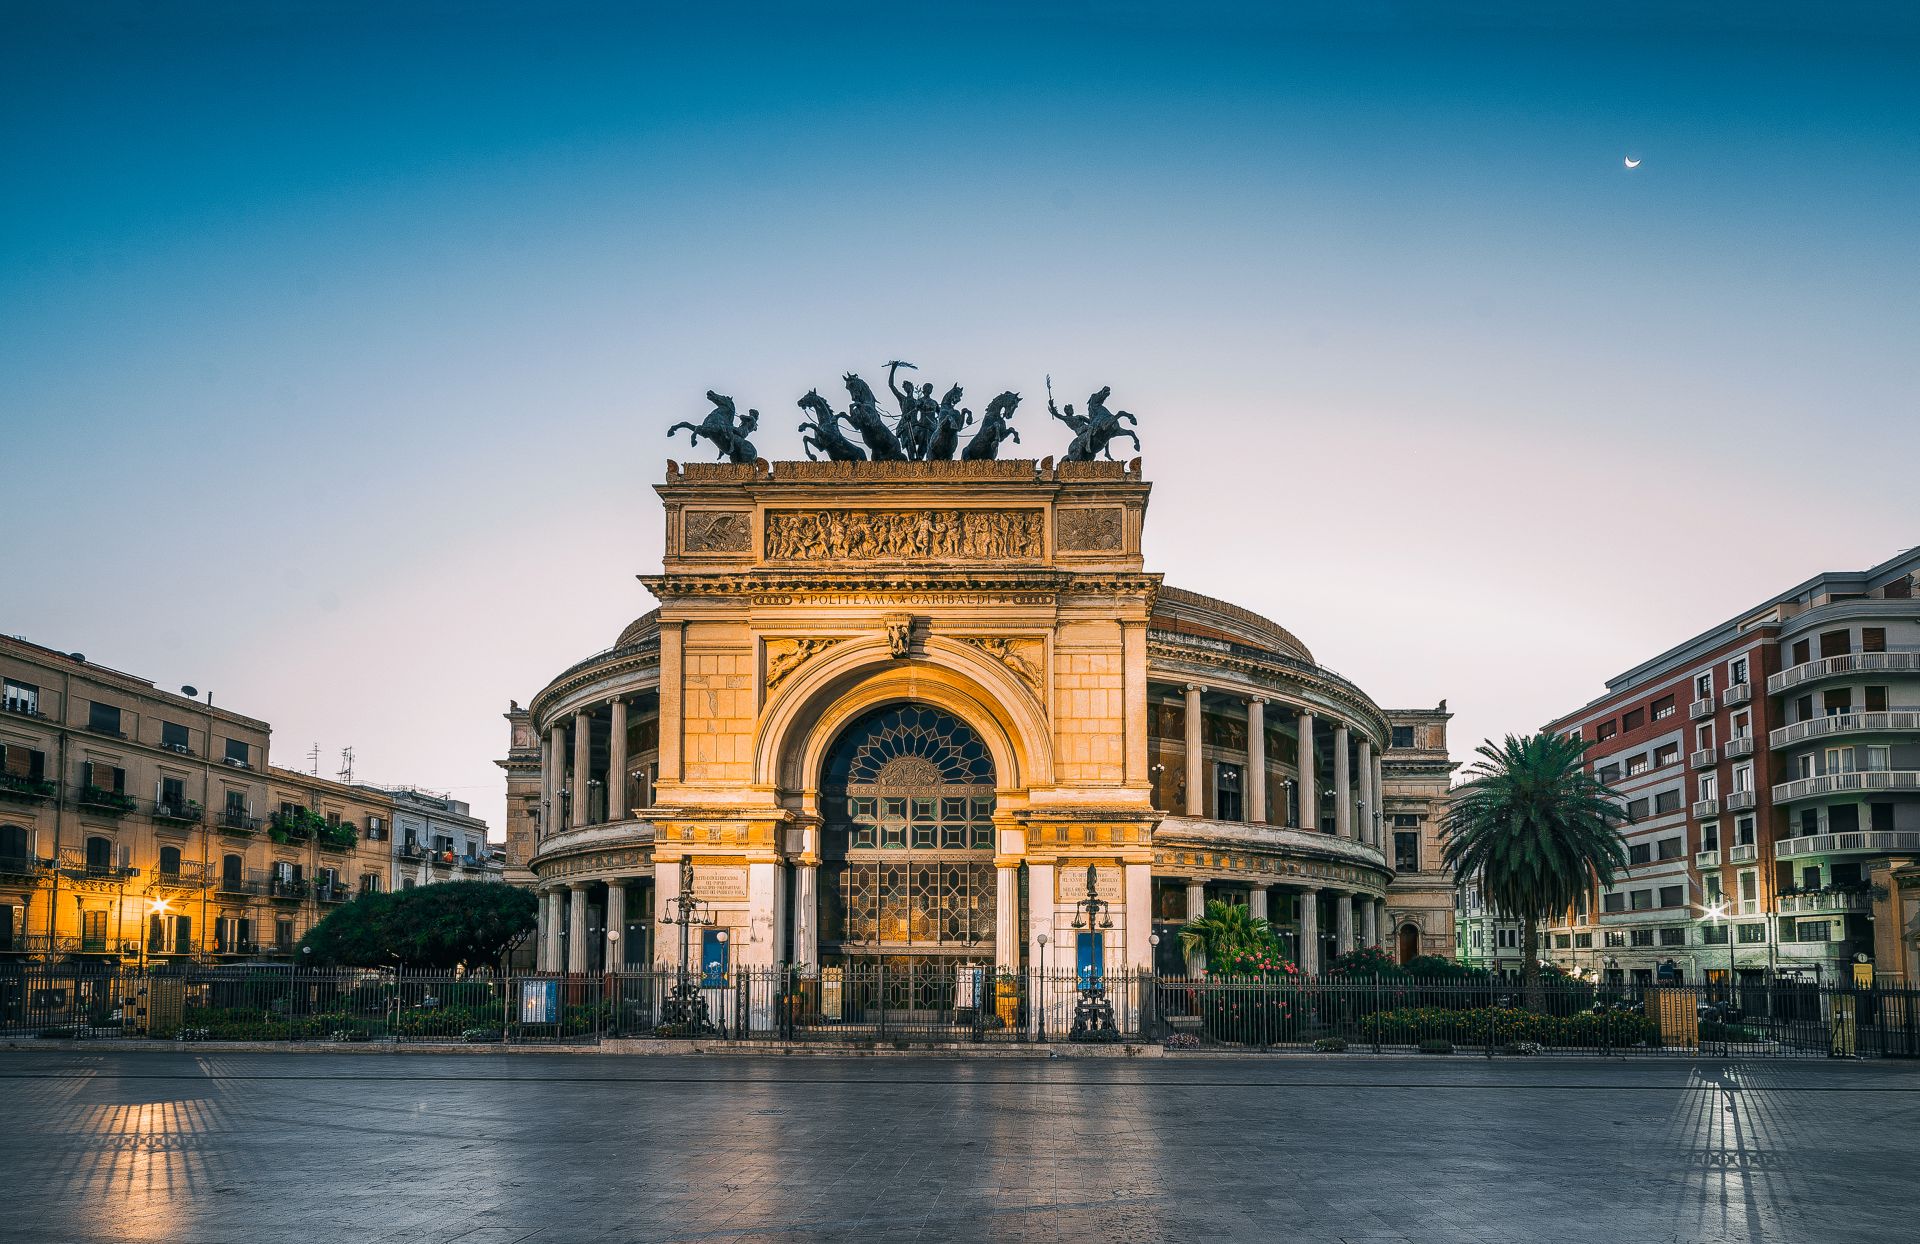 The-morning-view-of-the-Politeama-Garibaldi-theater-in-Palermo-Sicily-Italy